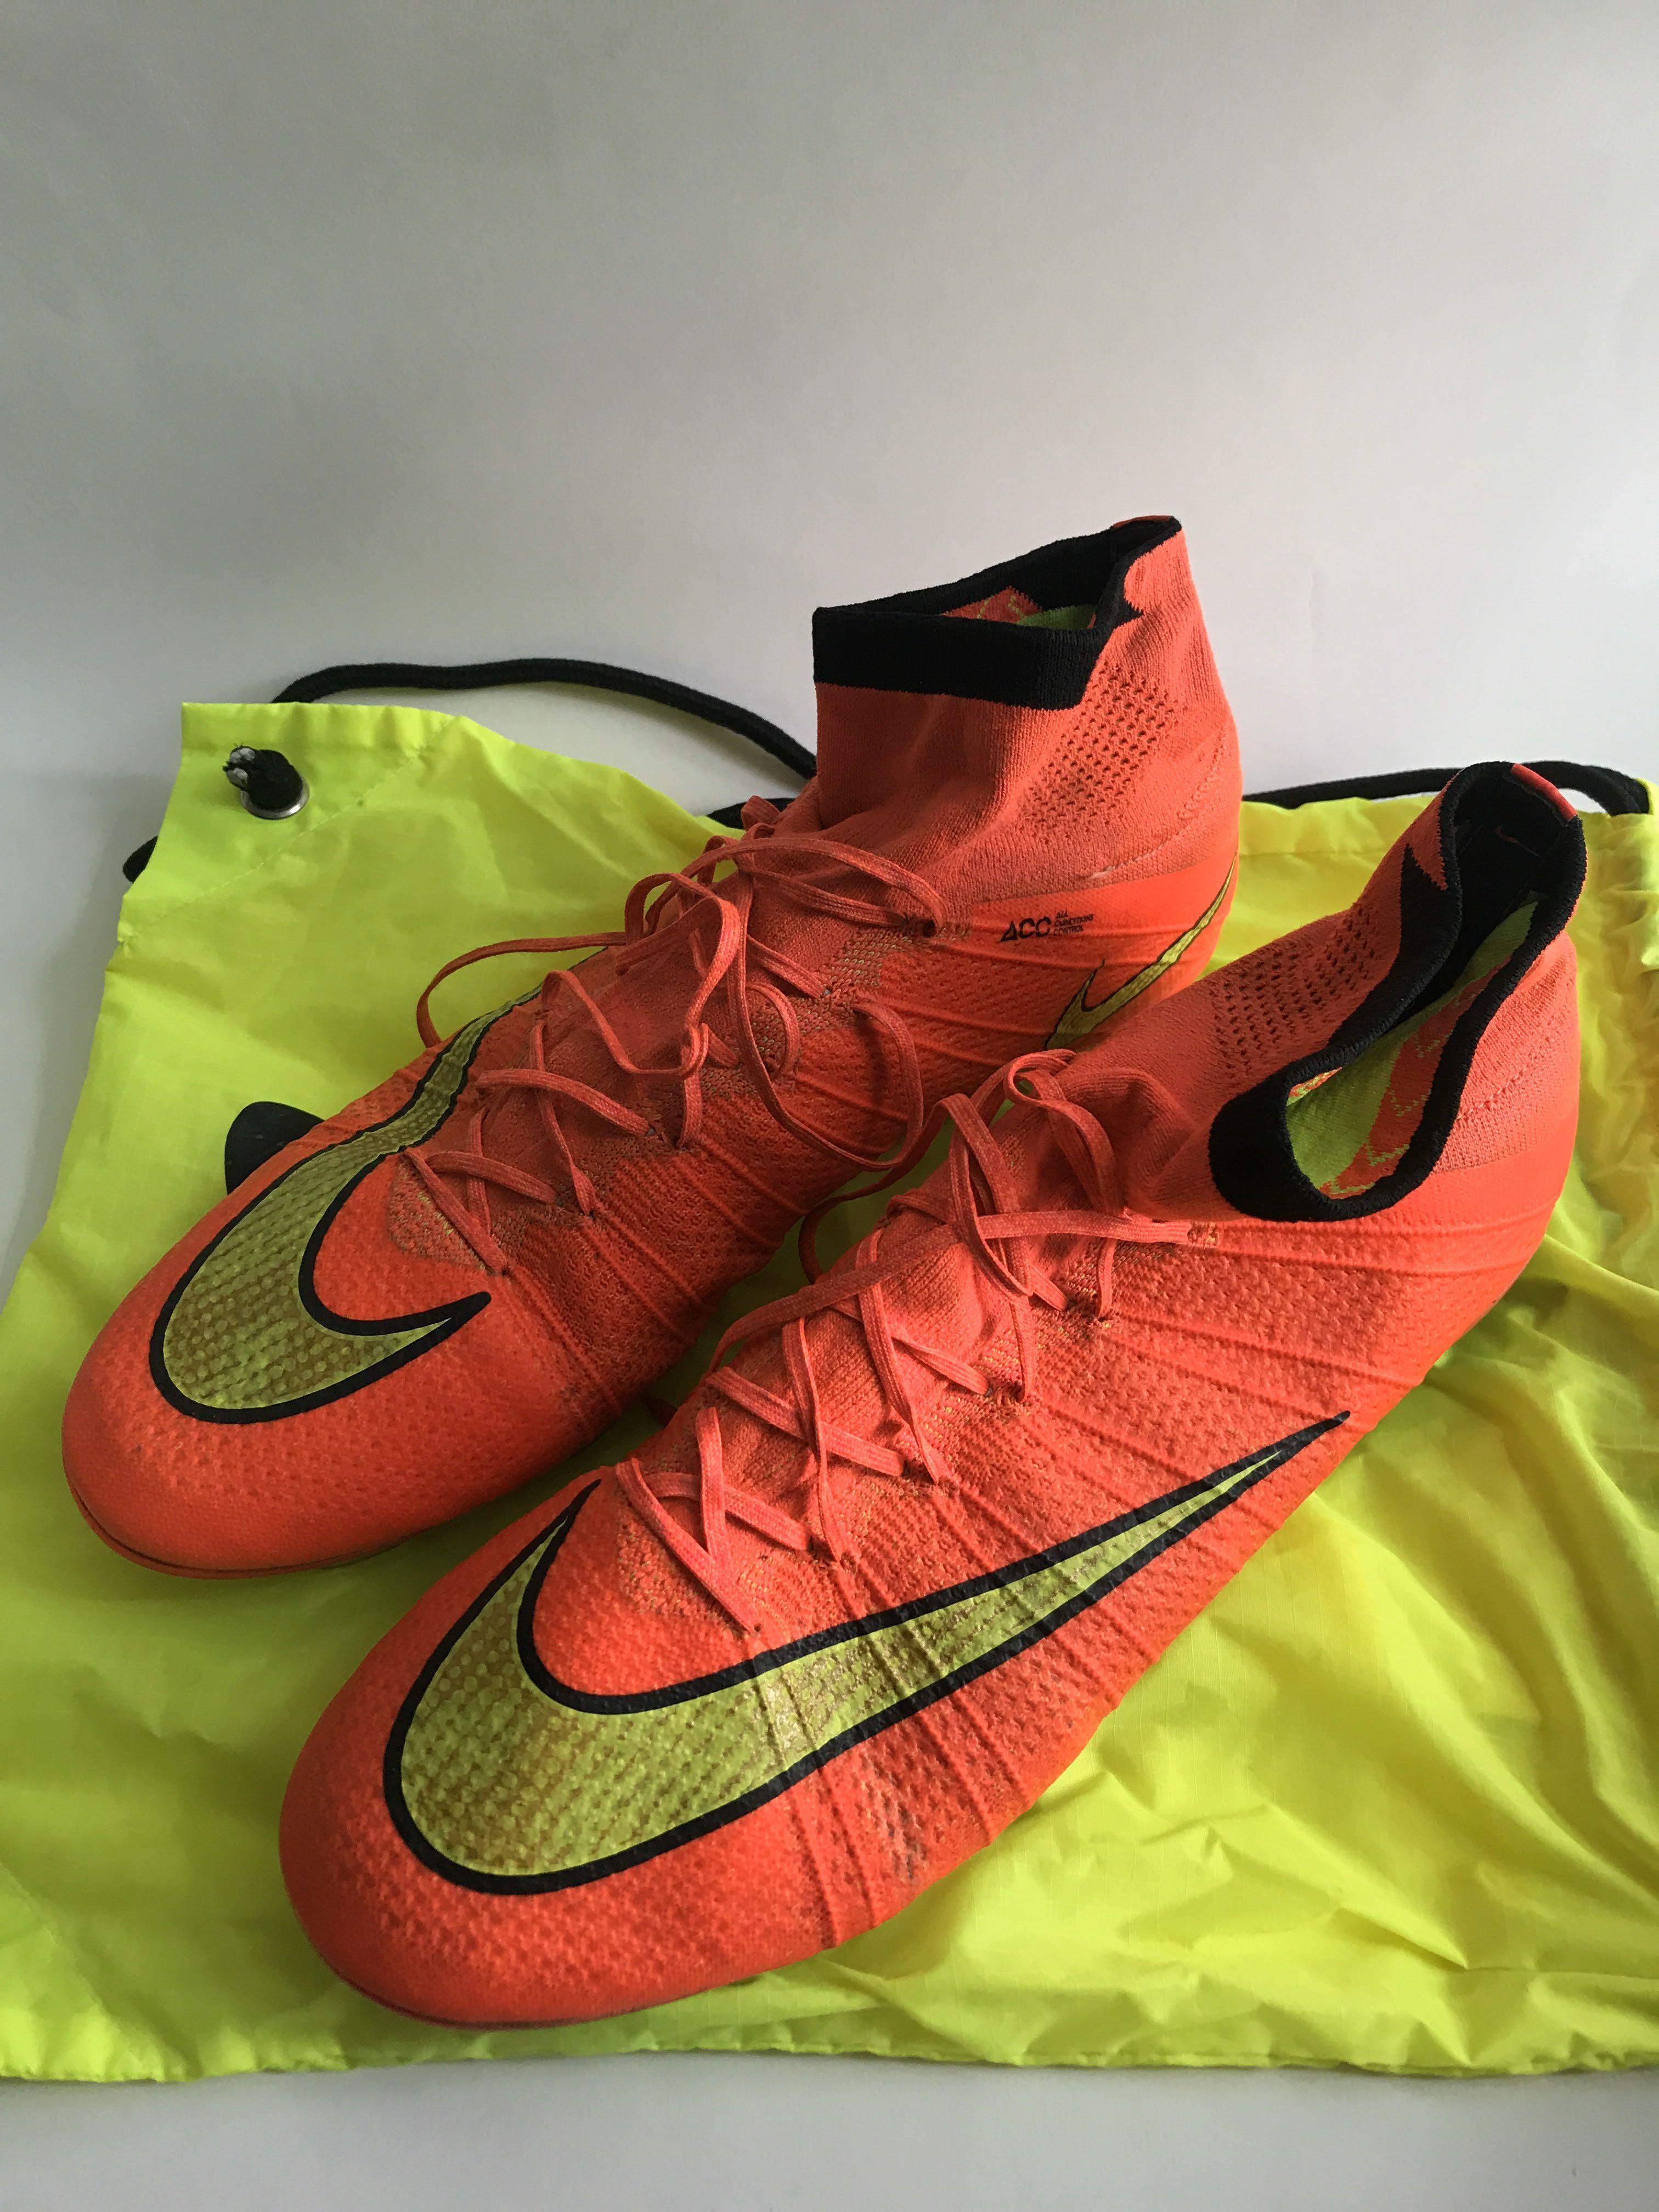 Nike Mercurial Vapor Superfly 4 2014 soccer boots, Sports Equipment, Sports & Games, Racket Ball Sports on Carousell